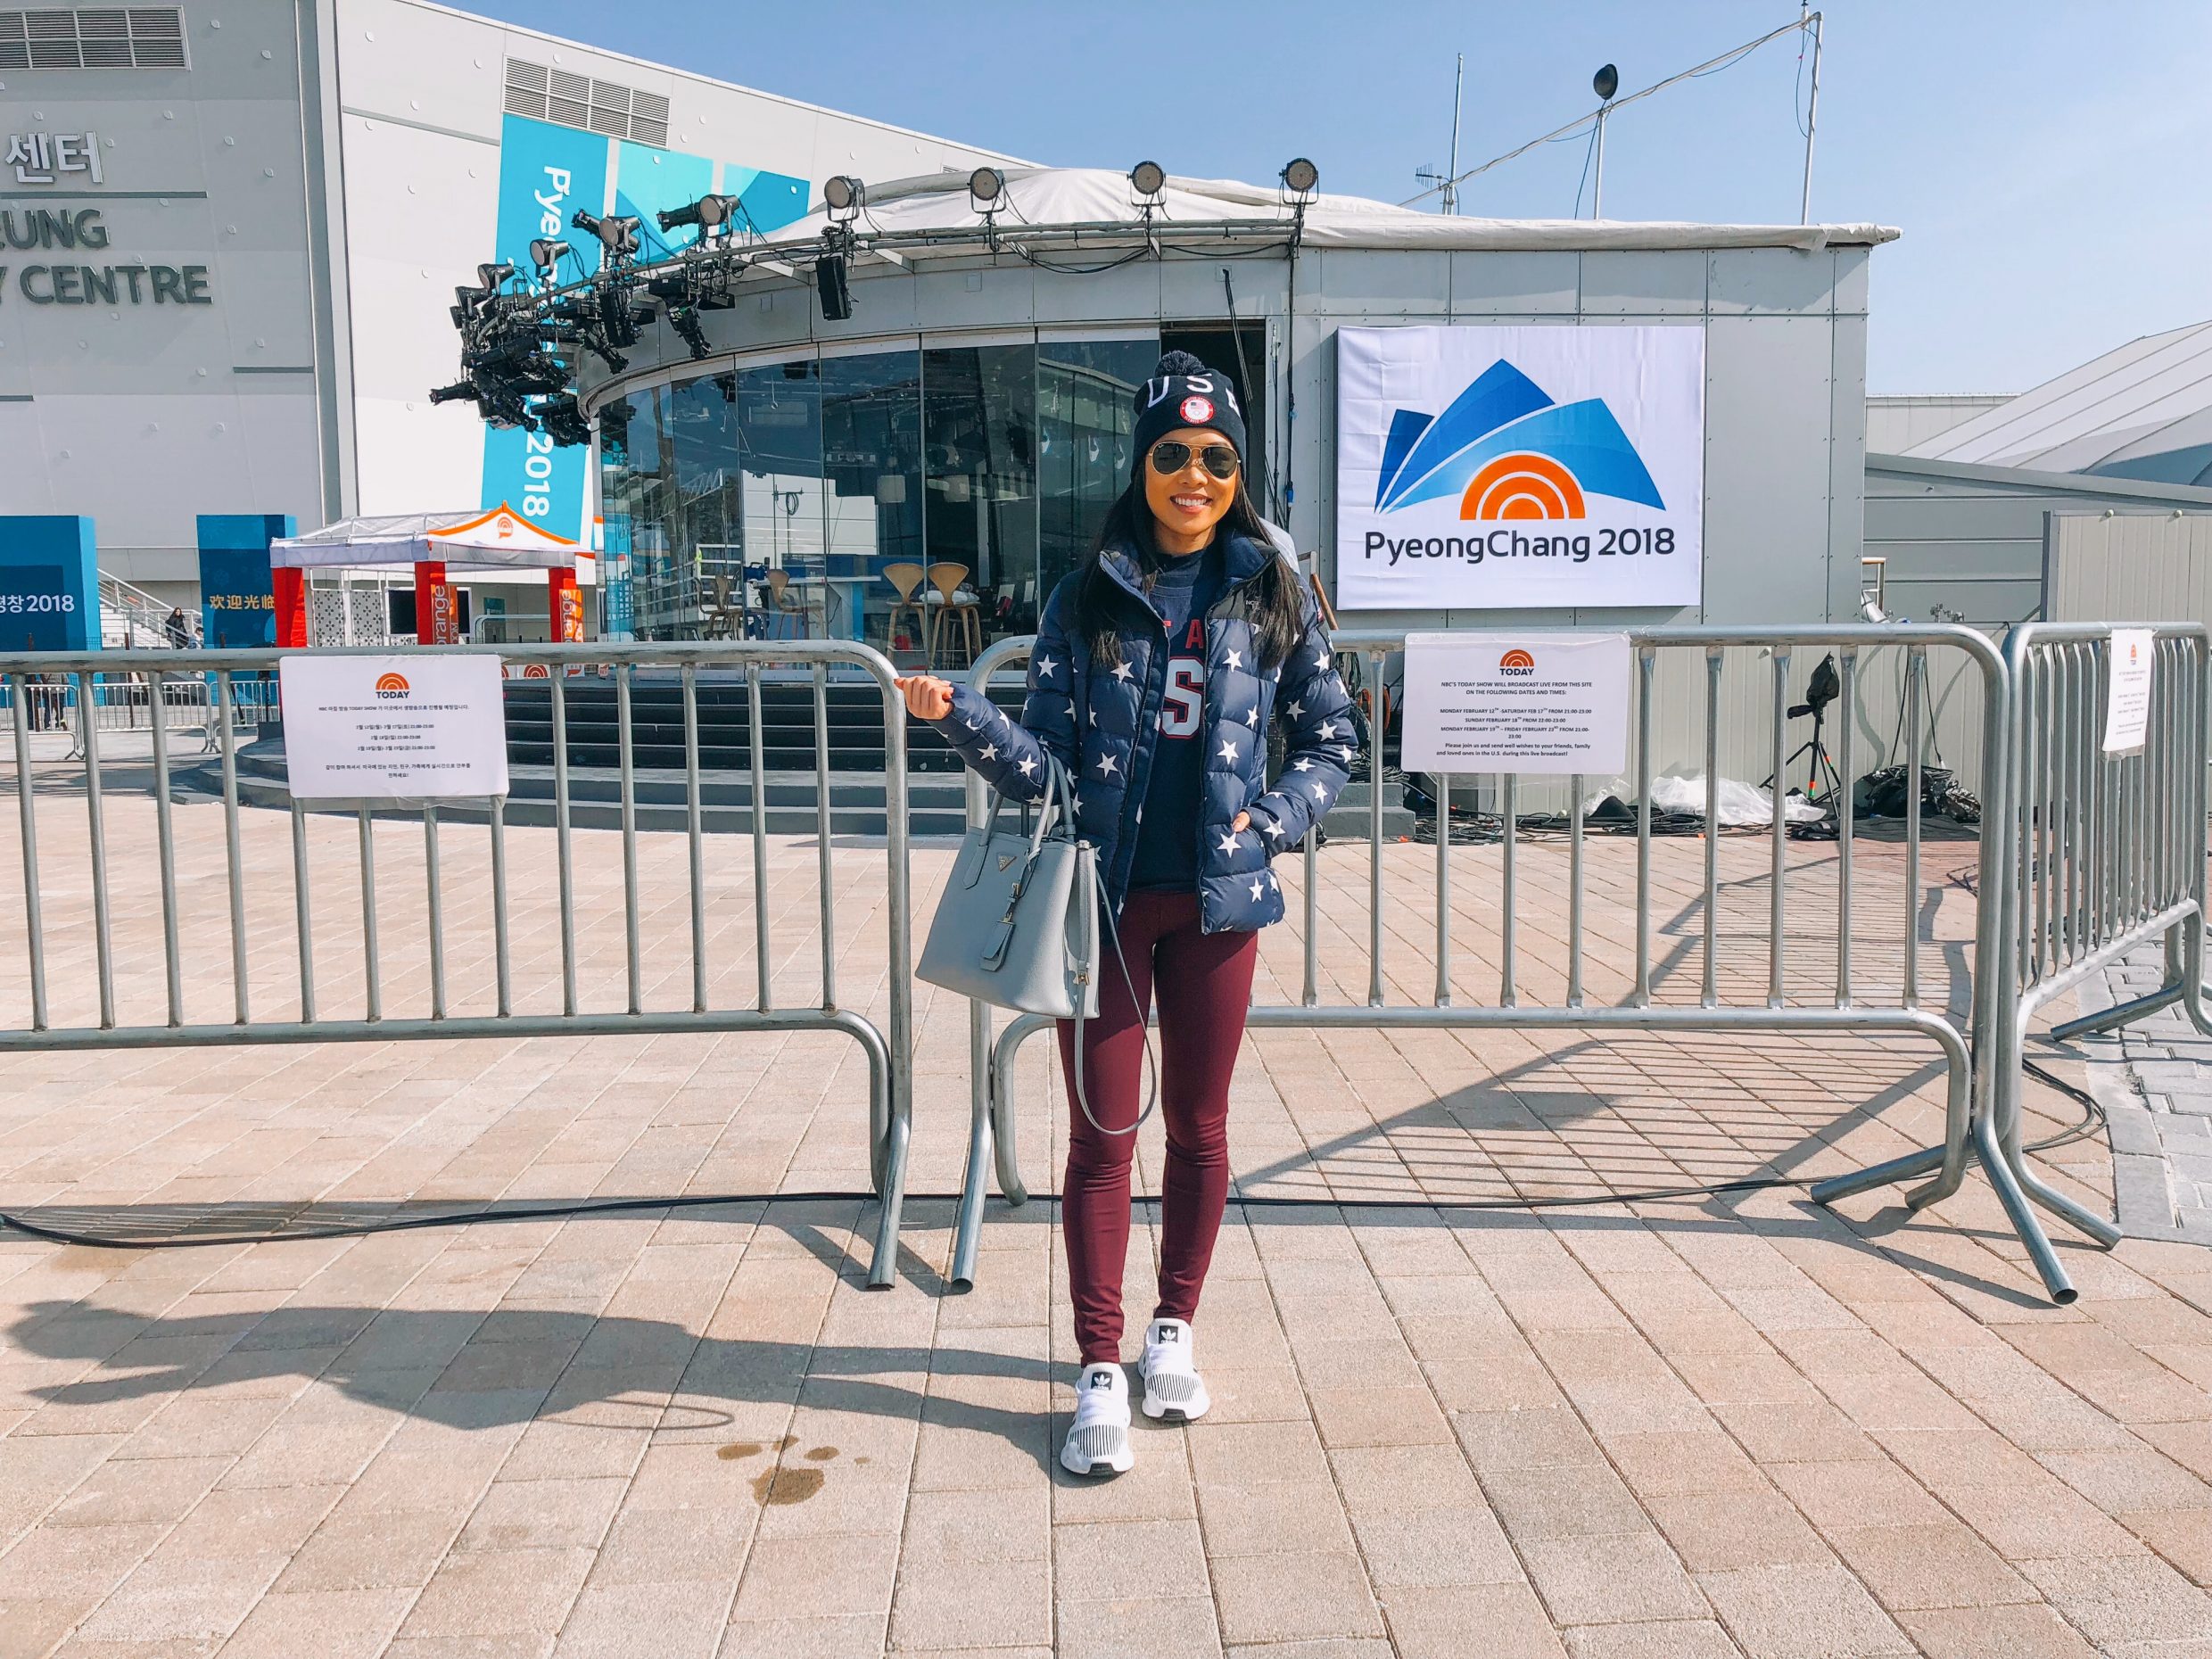 The North Face Star Print Jacket with burgundy leggings and Team USA Nike hat outside Today Show Set at PyeongChang 2018 Winter Olympics